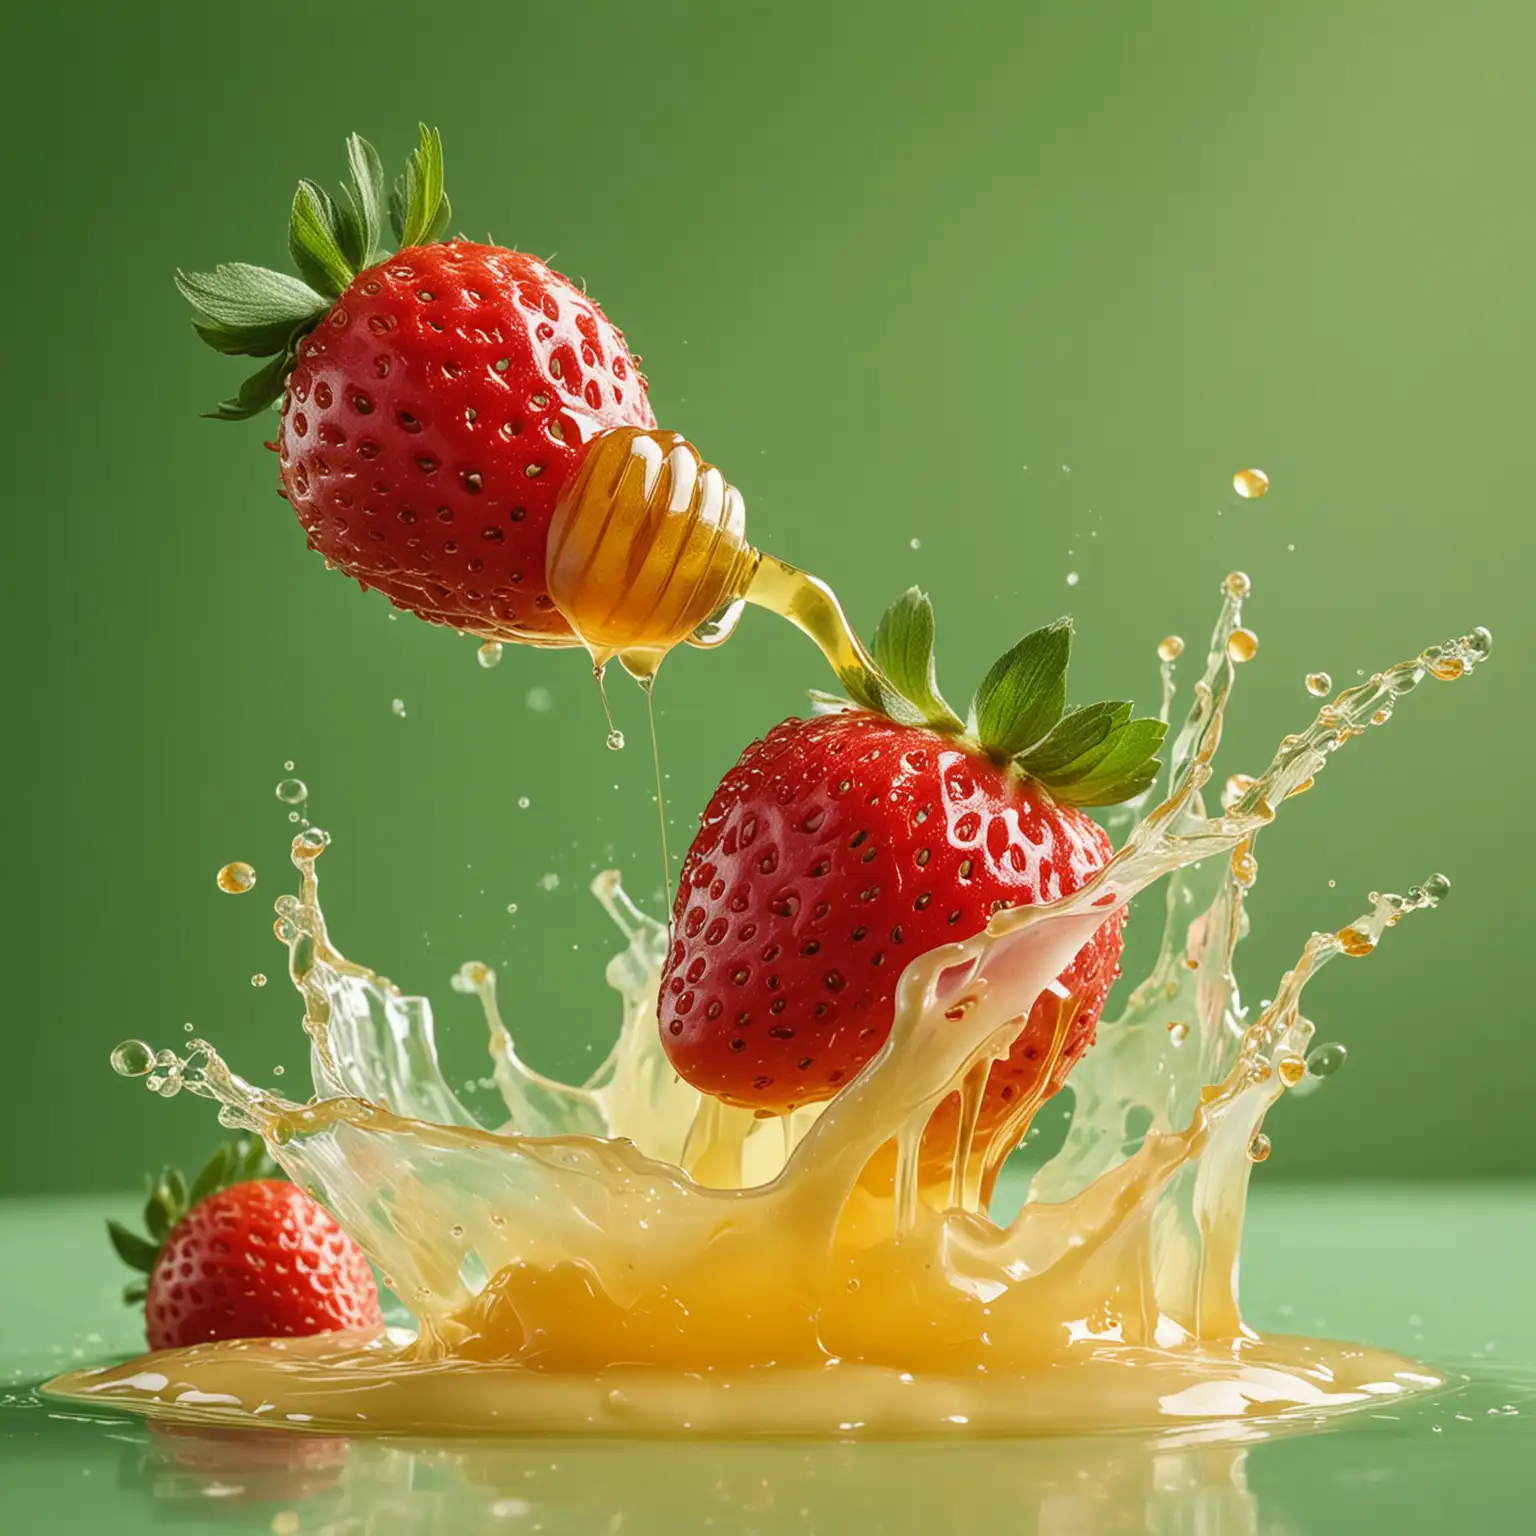 Vibrant-Green-Background-with-Juicy-Honey-Cream-and-Flying-Strawberries